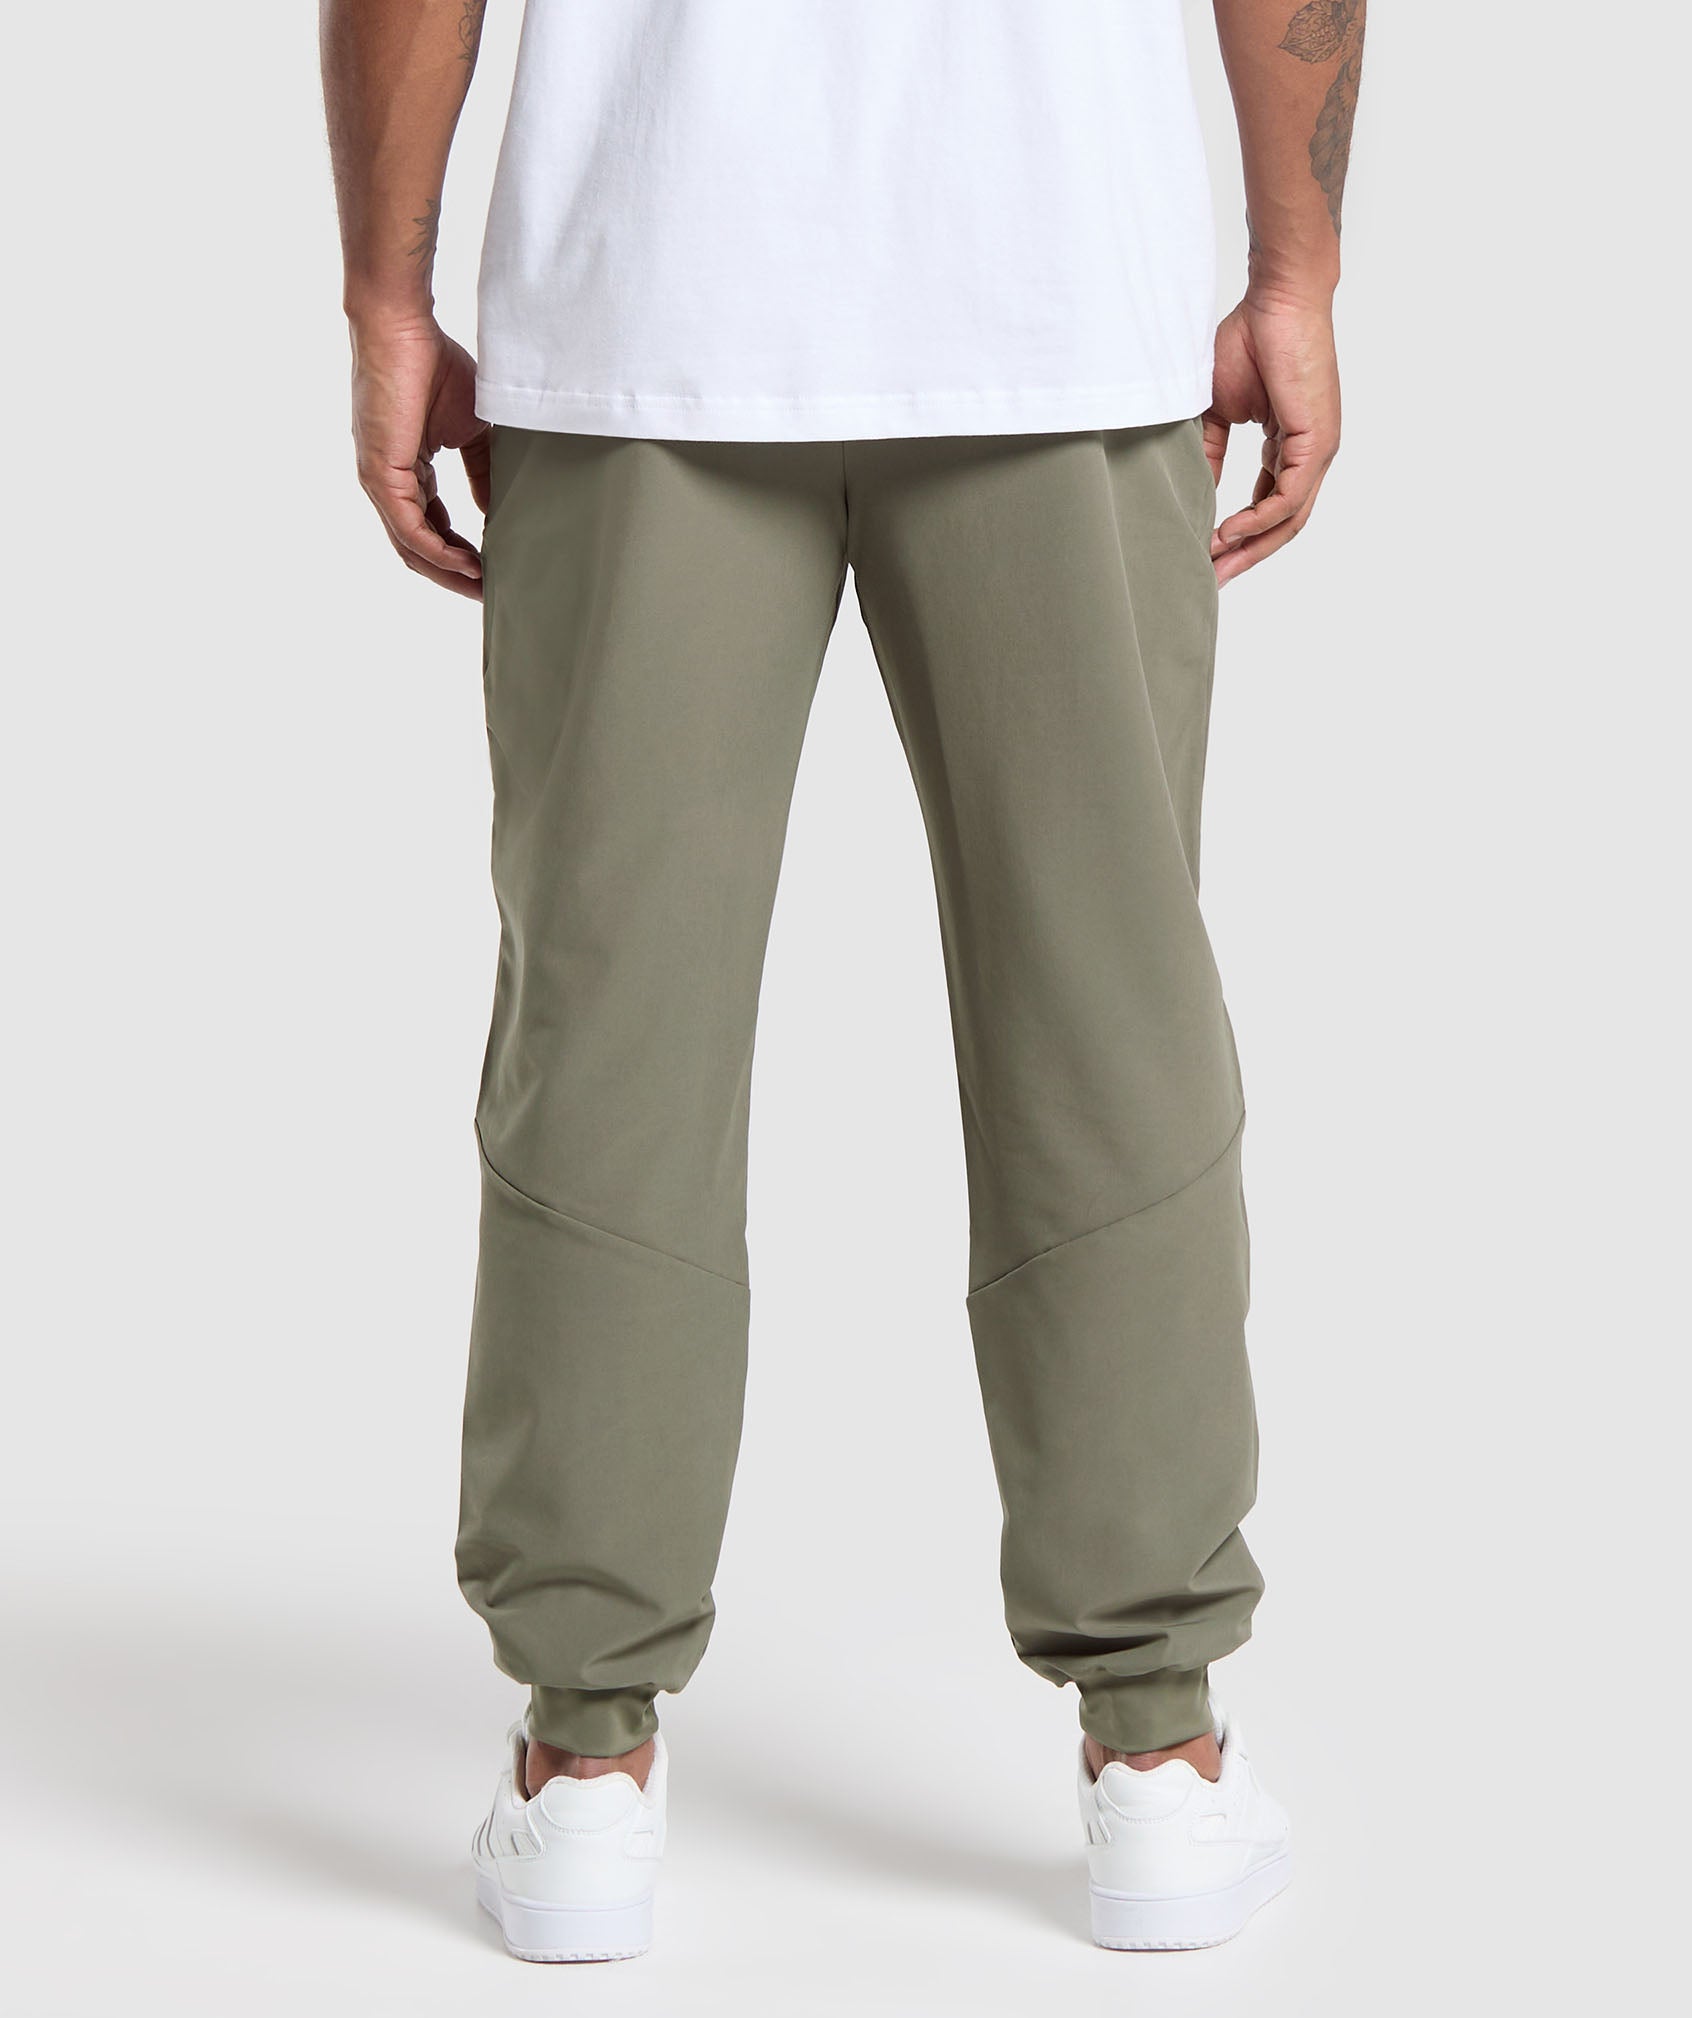 Ease Woven Joggers in Base Green - view 5